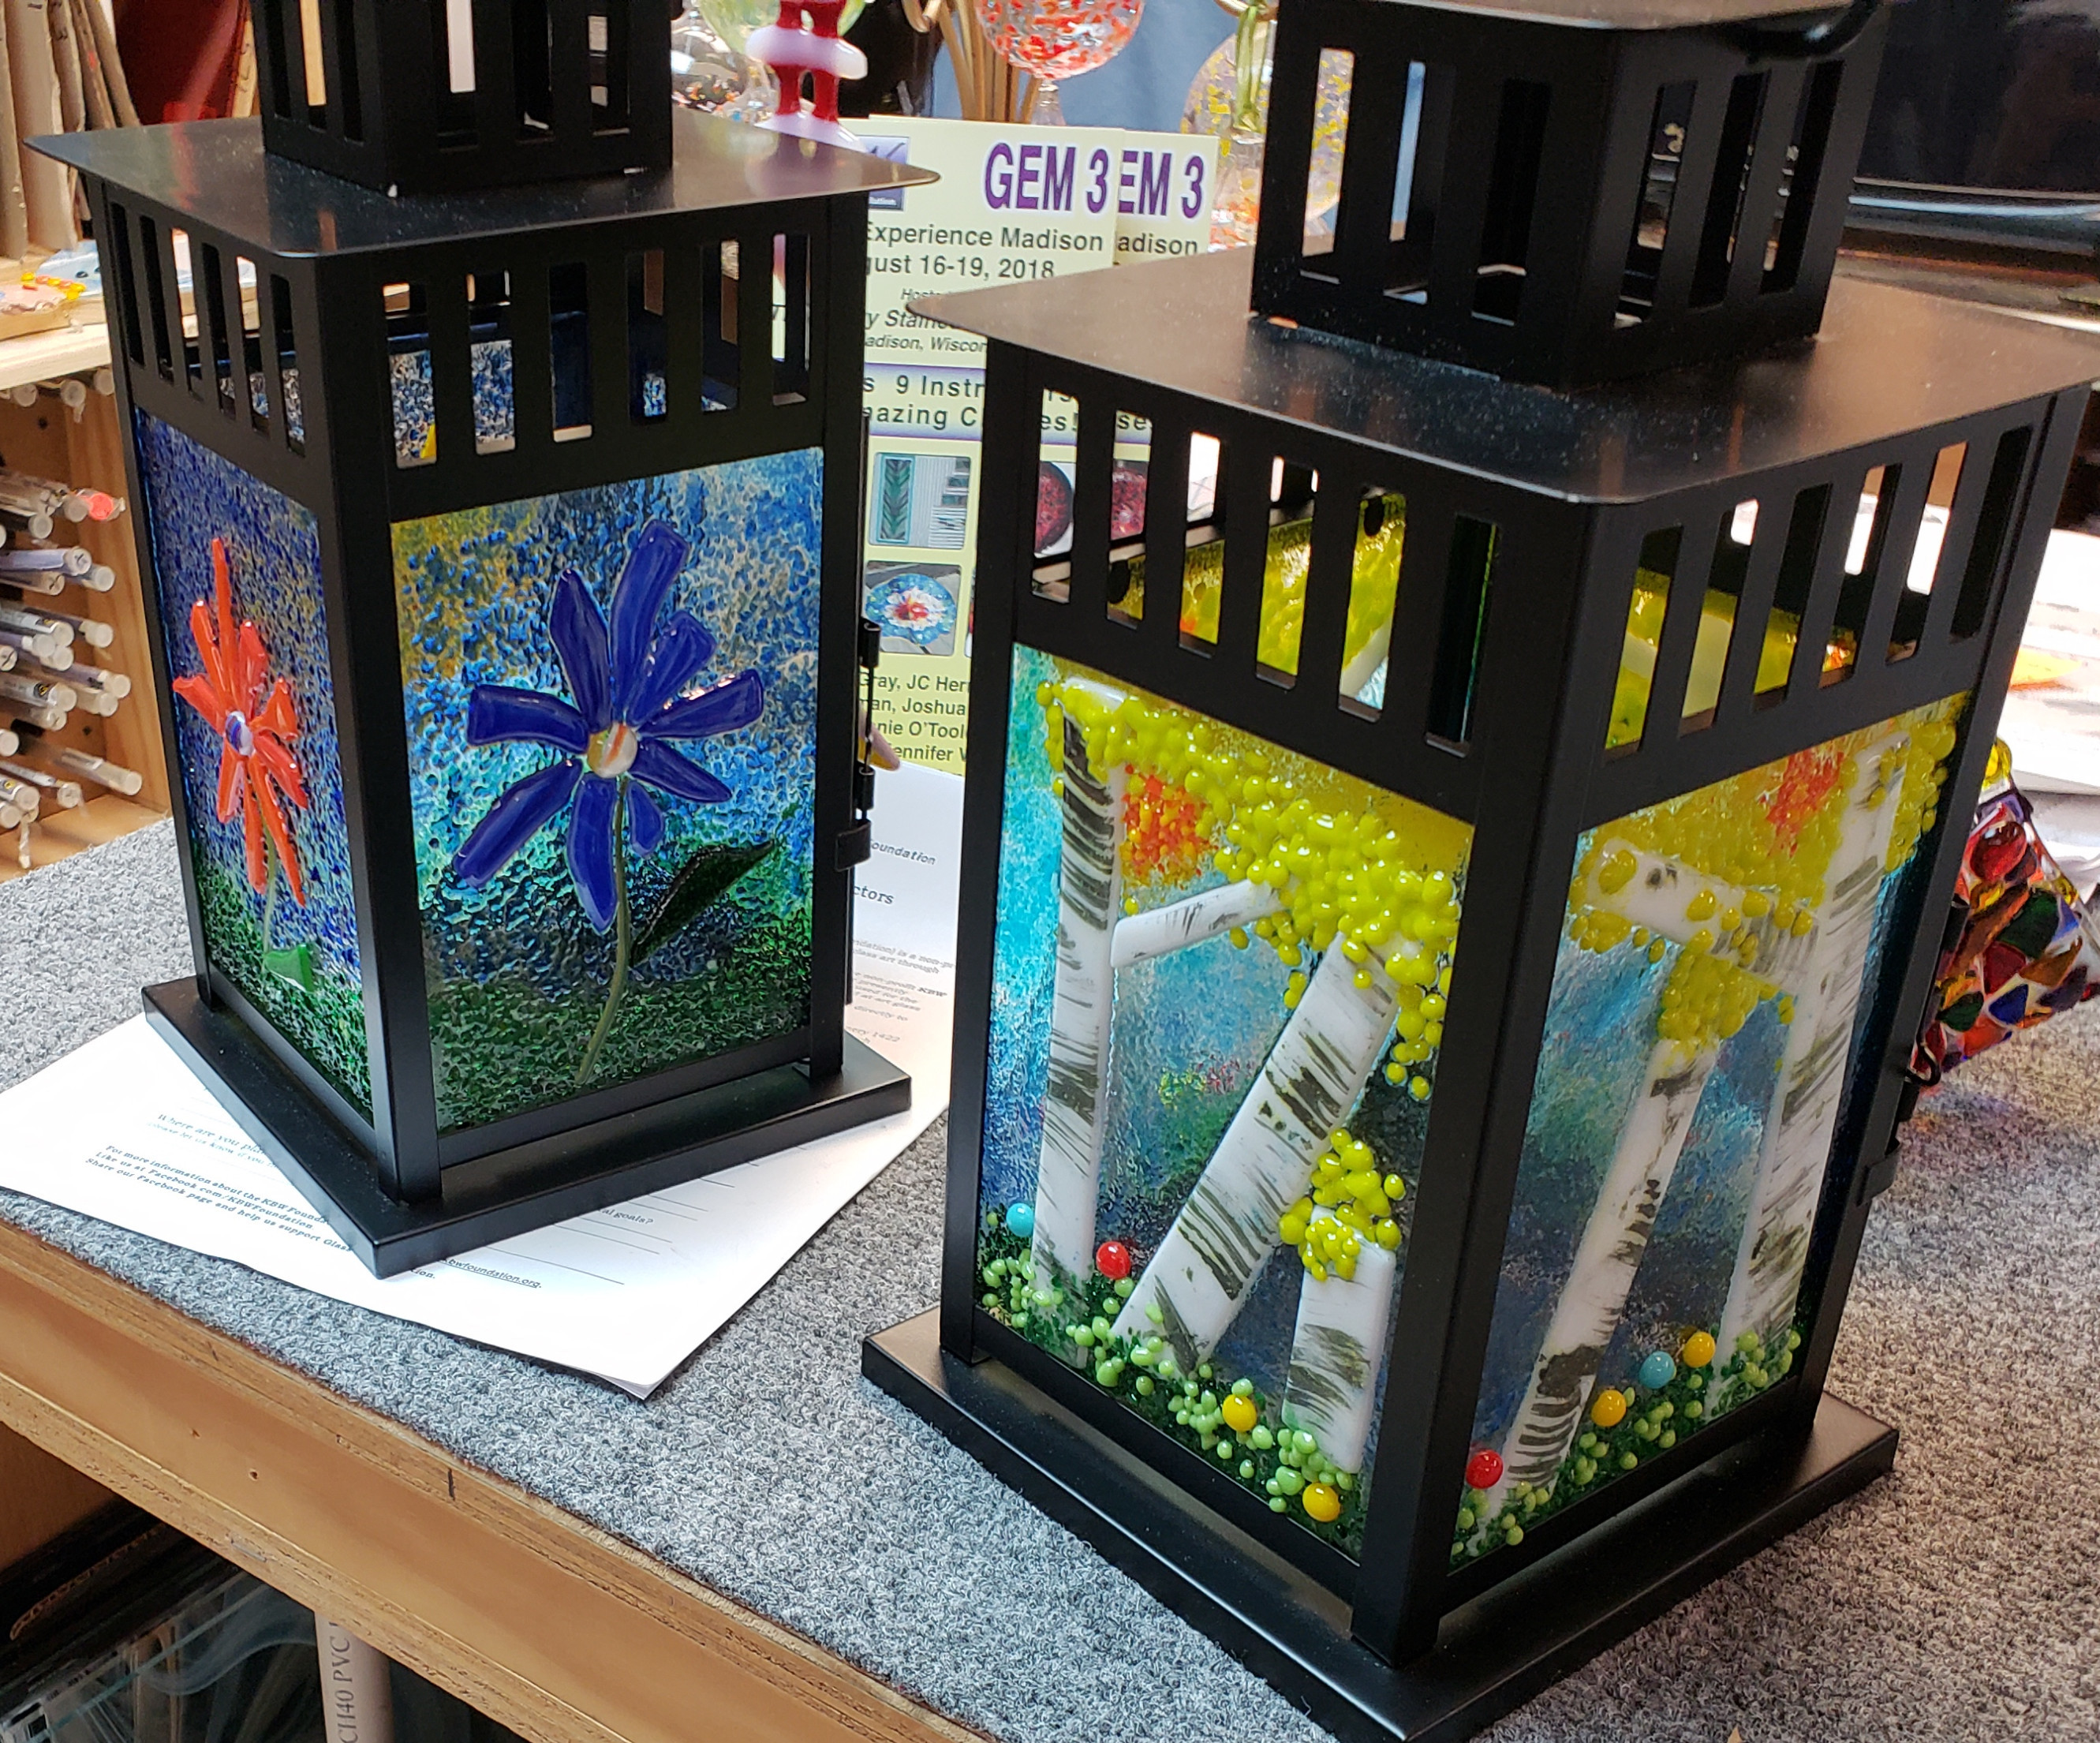 <strong><span style="font-family:arial black,sans-serif"><span style="font-size:22.0pt">Fused Glass Lantern&nbsp;&nbsp;&nbsp;&nbsp;&nbsp;&nbsp;&nbsp;&nbsp;&nbsp;&nbsp;&nbsp;&nbsp;&nbsp;&nbsp;&nbsp; 4 Seasons</span></span></strong>